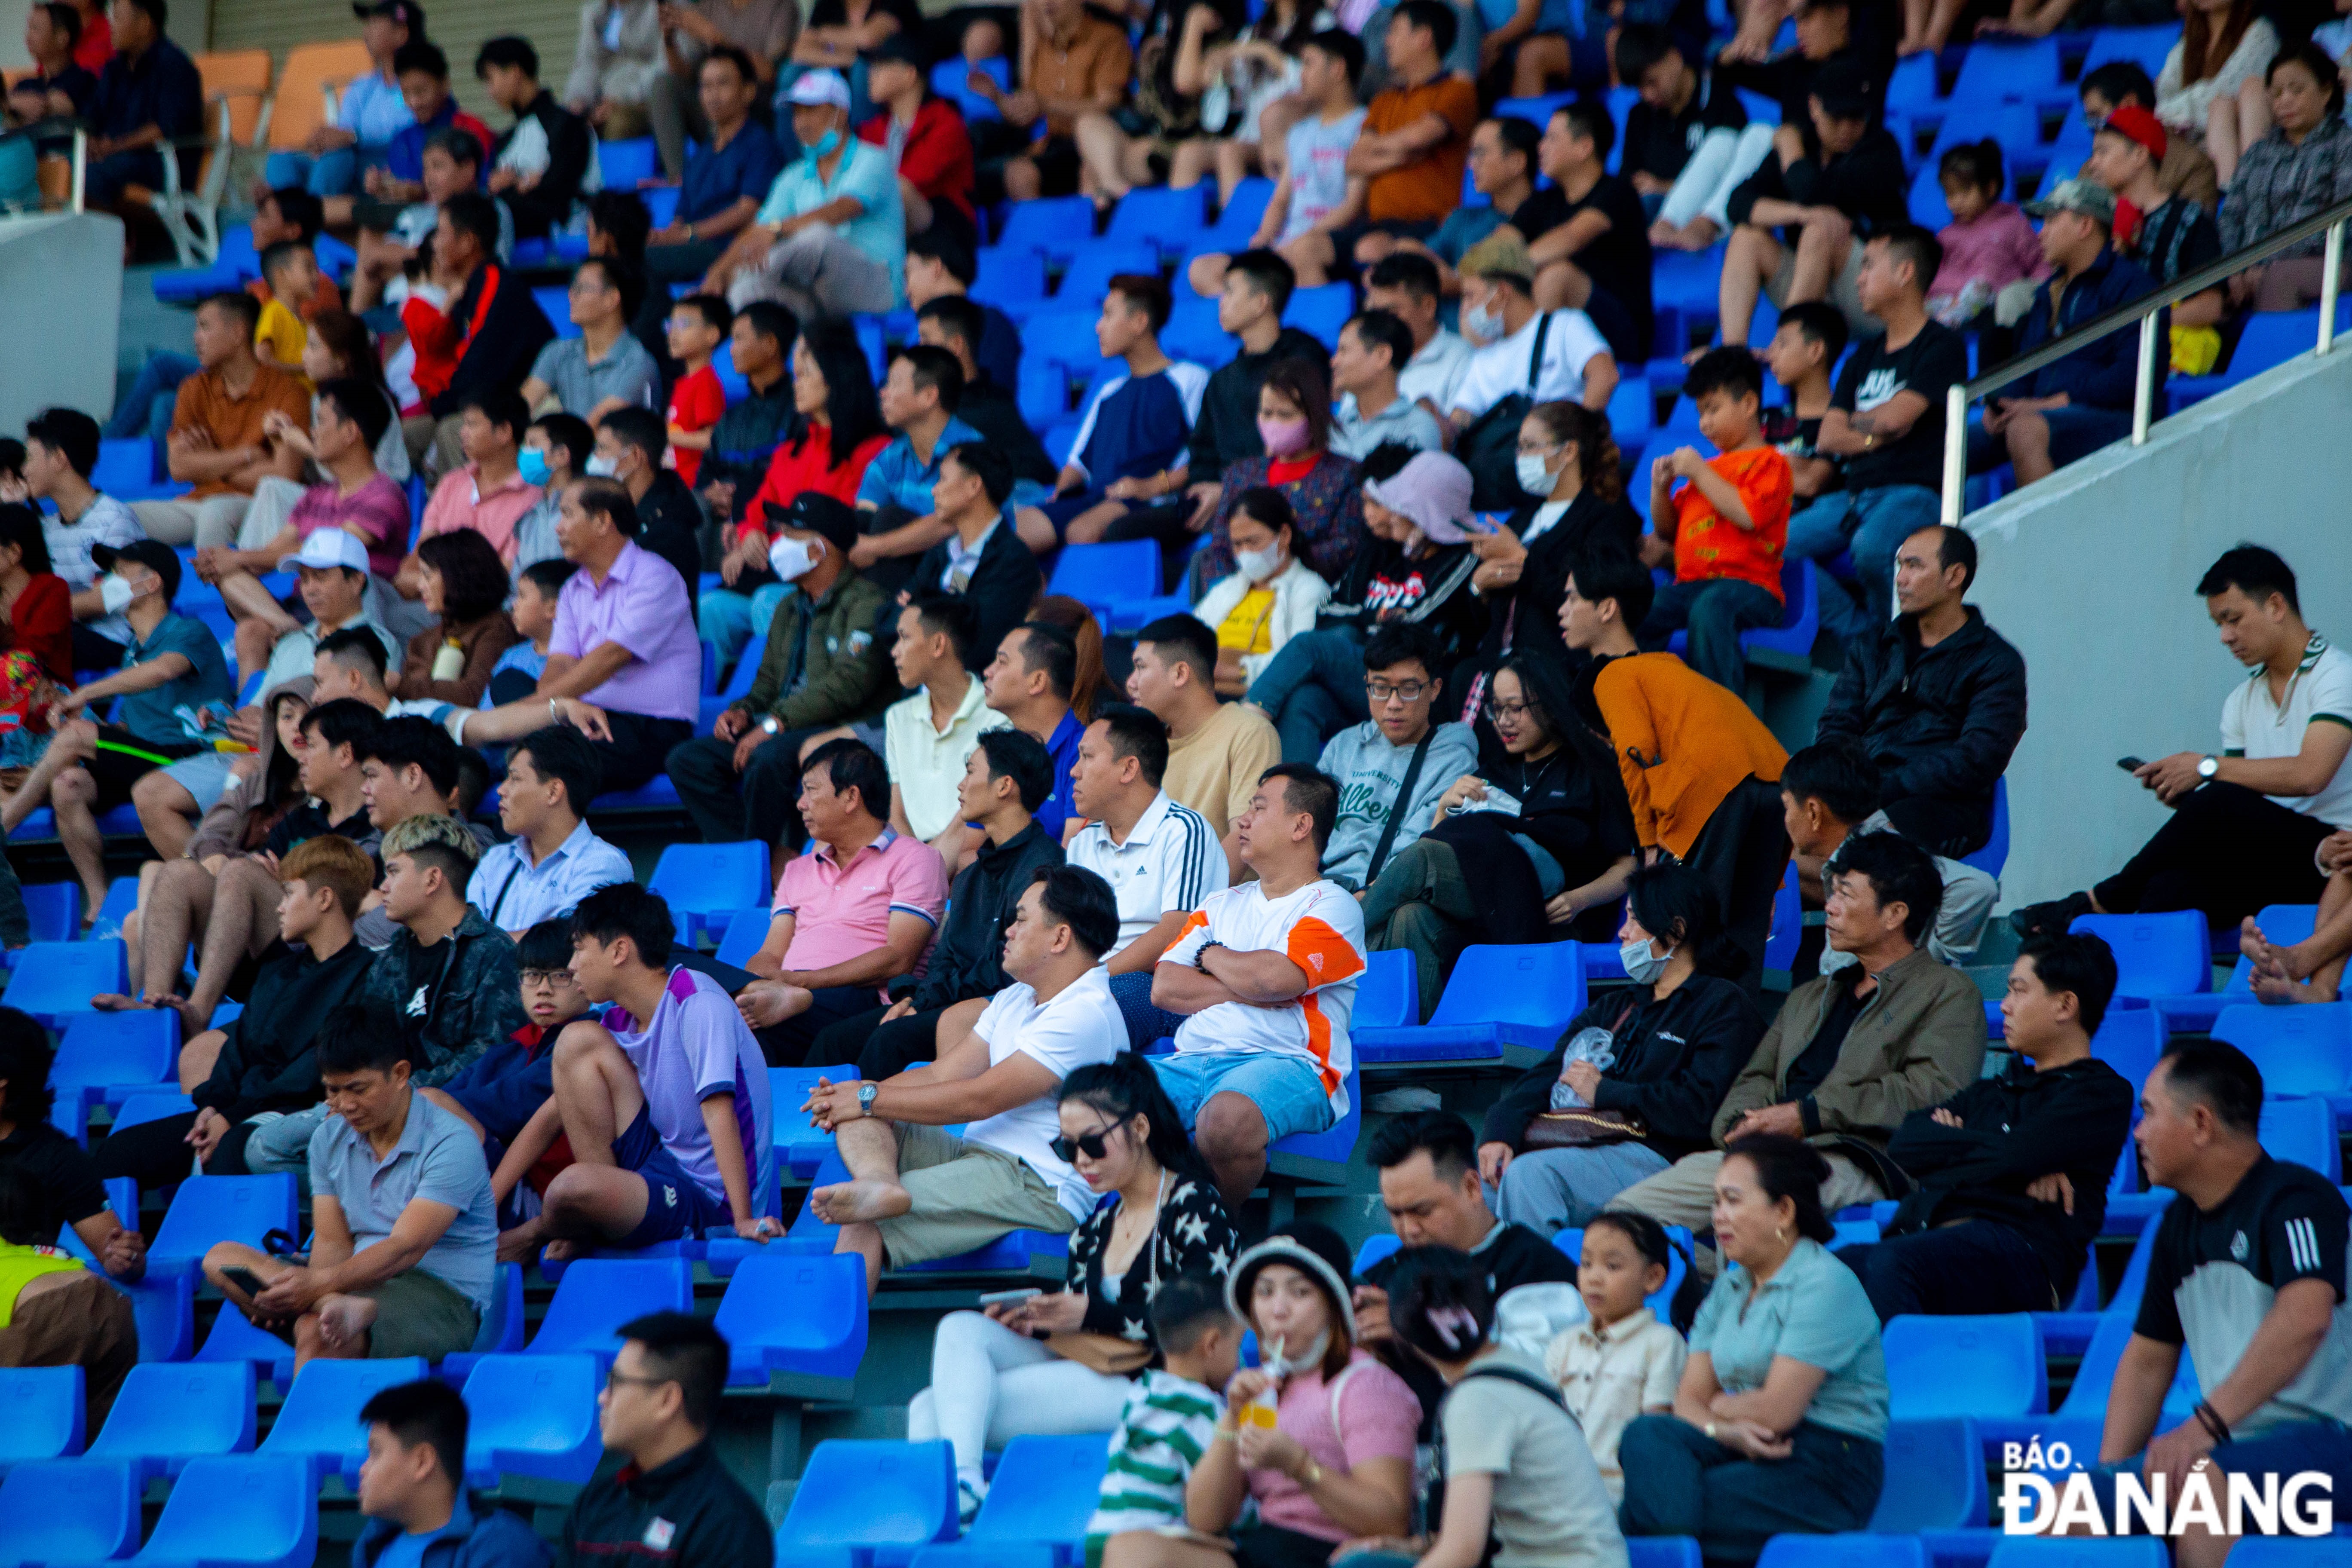 A large number of fans came to the Hoa Xuan Stadium to support the home team.